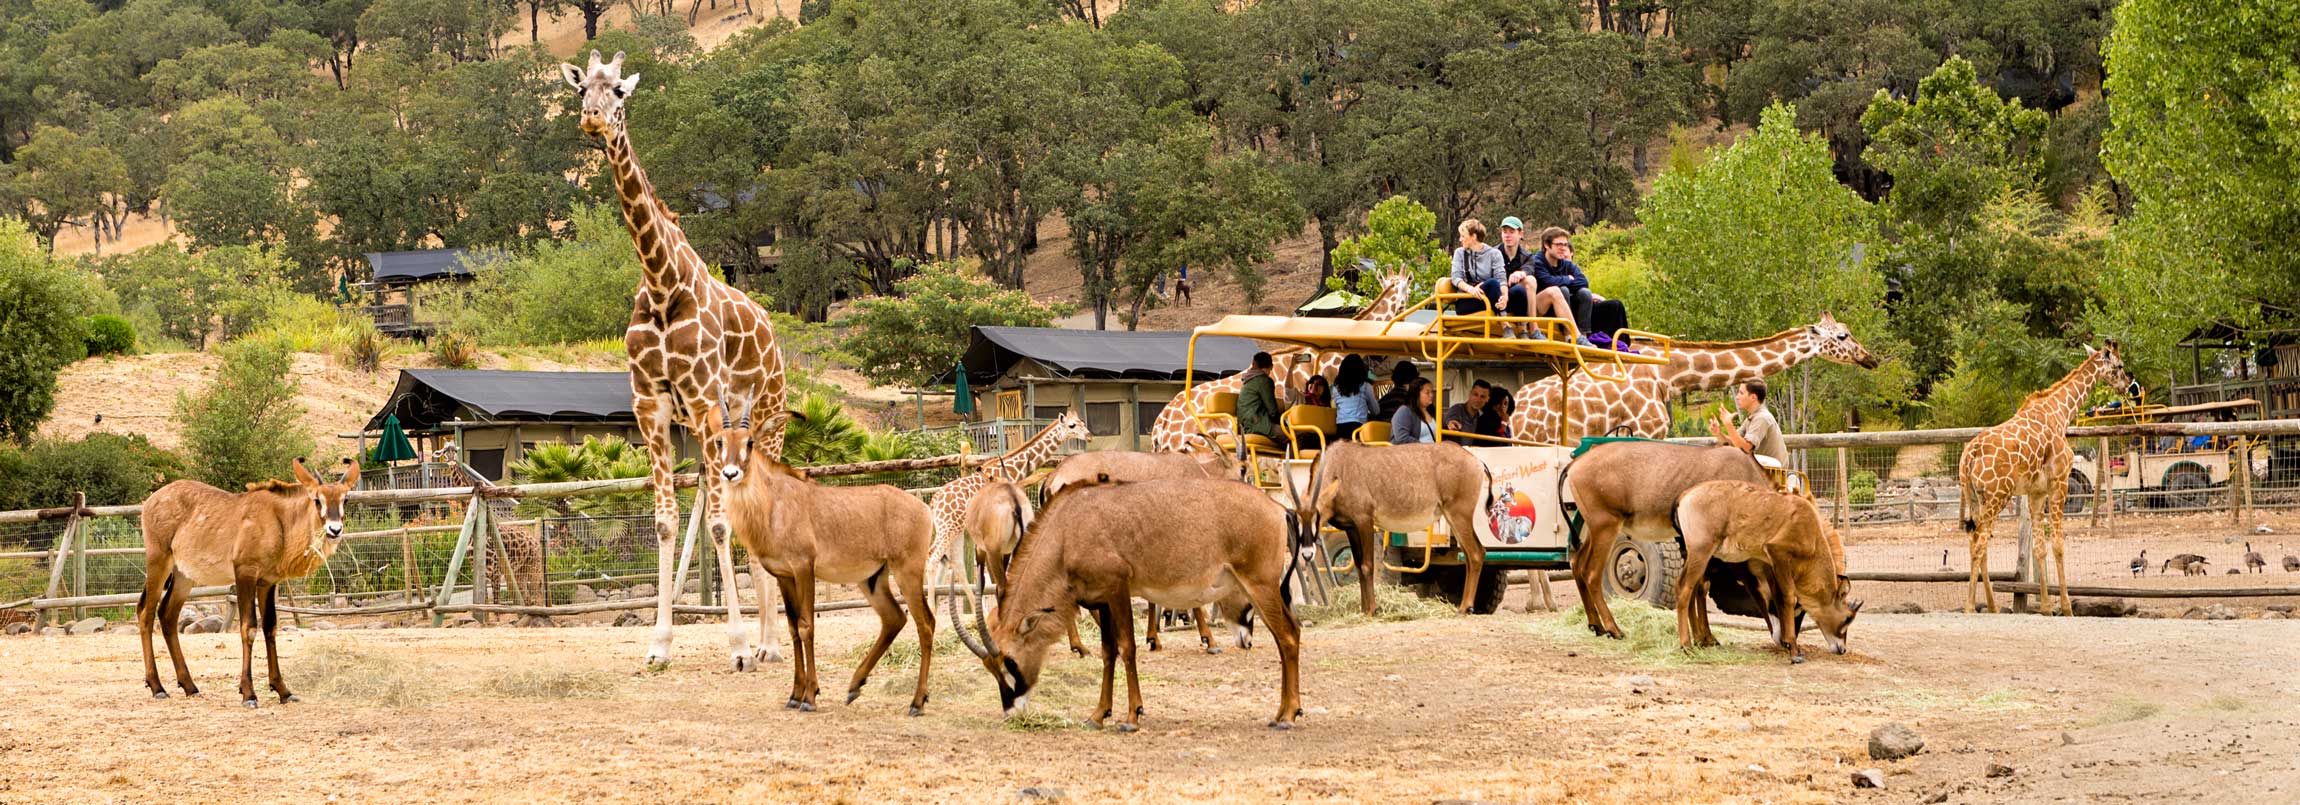 safari west about